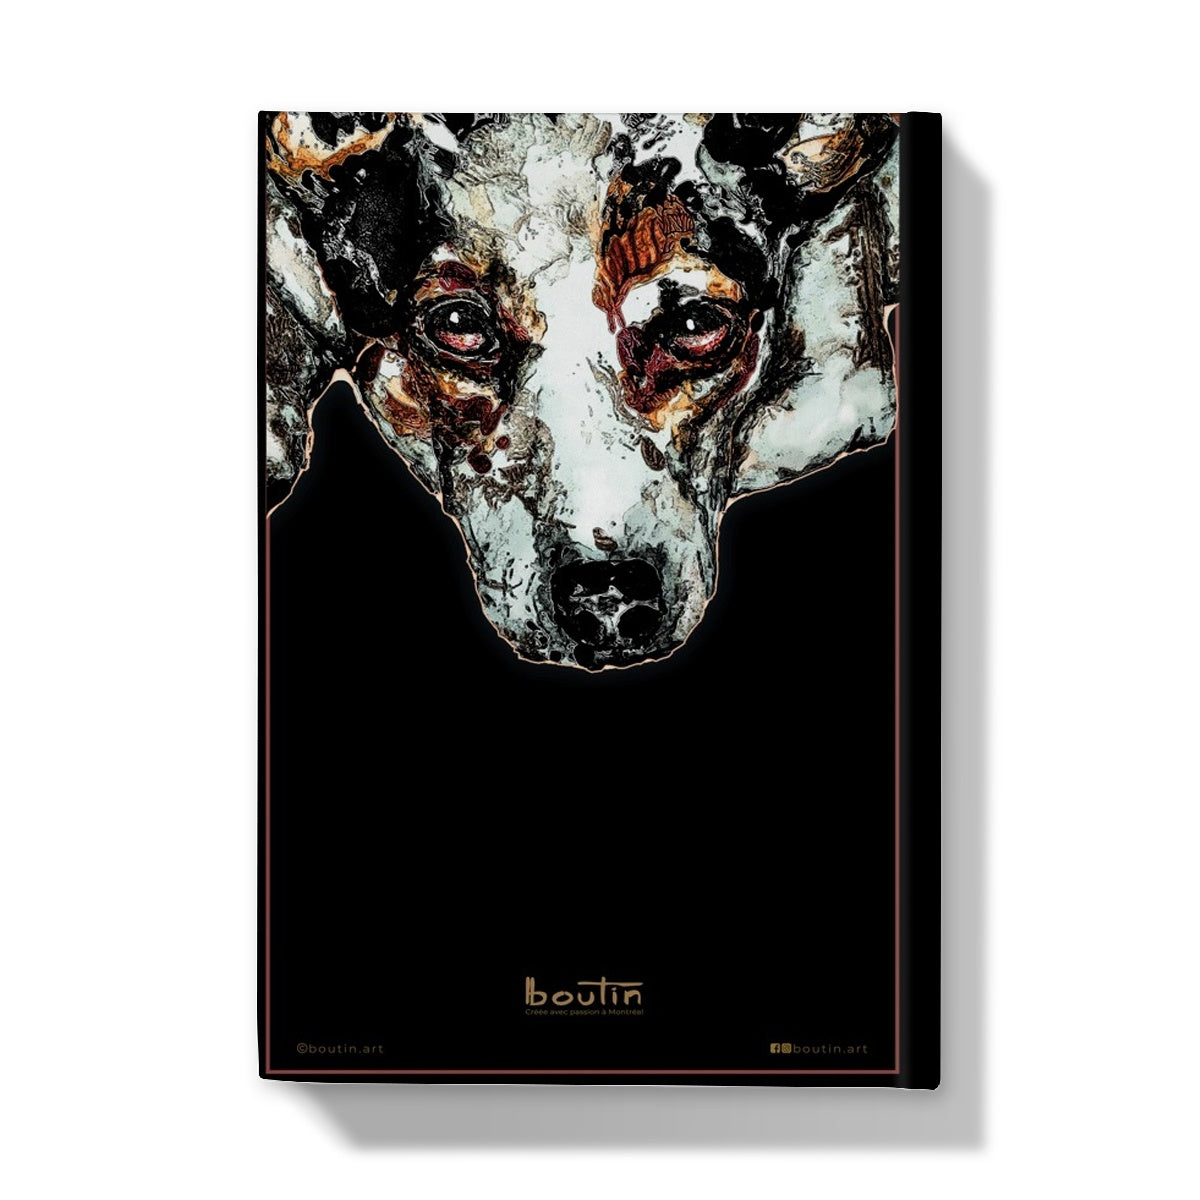 Black Russell - Notebook by the artist Boutin